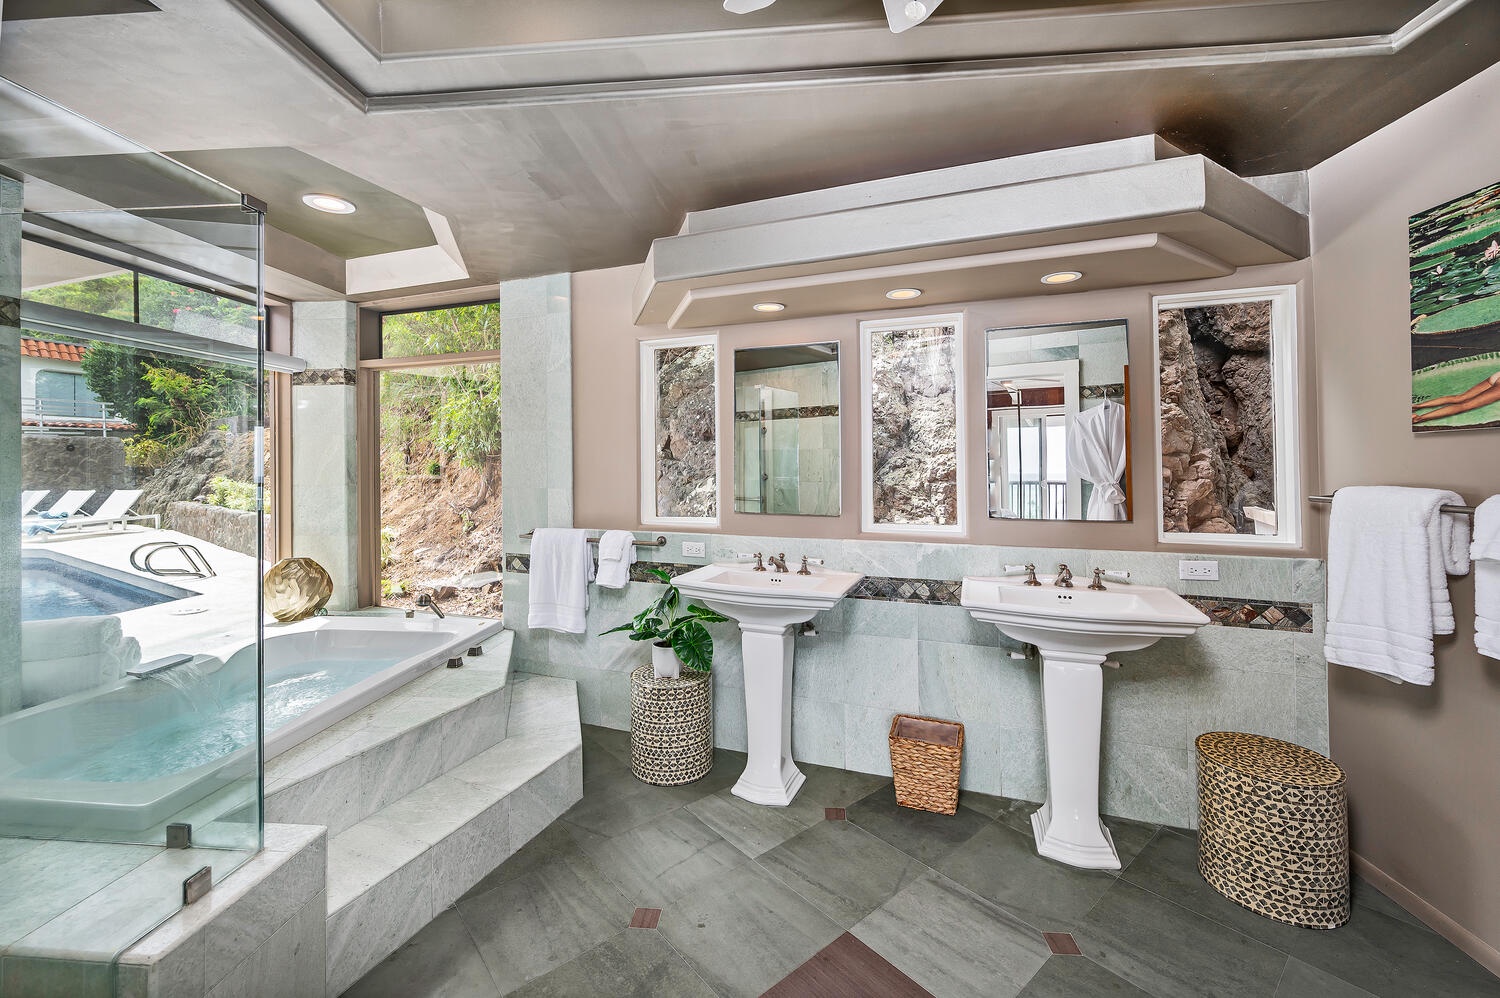 Kailua Vacation Rentals, Hale Lani - Primary ensuite with dual sinks and soaking tub